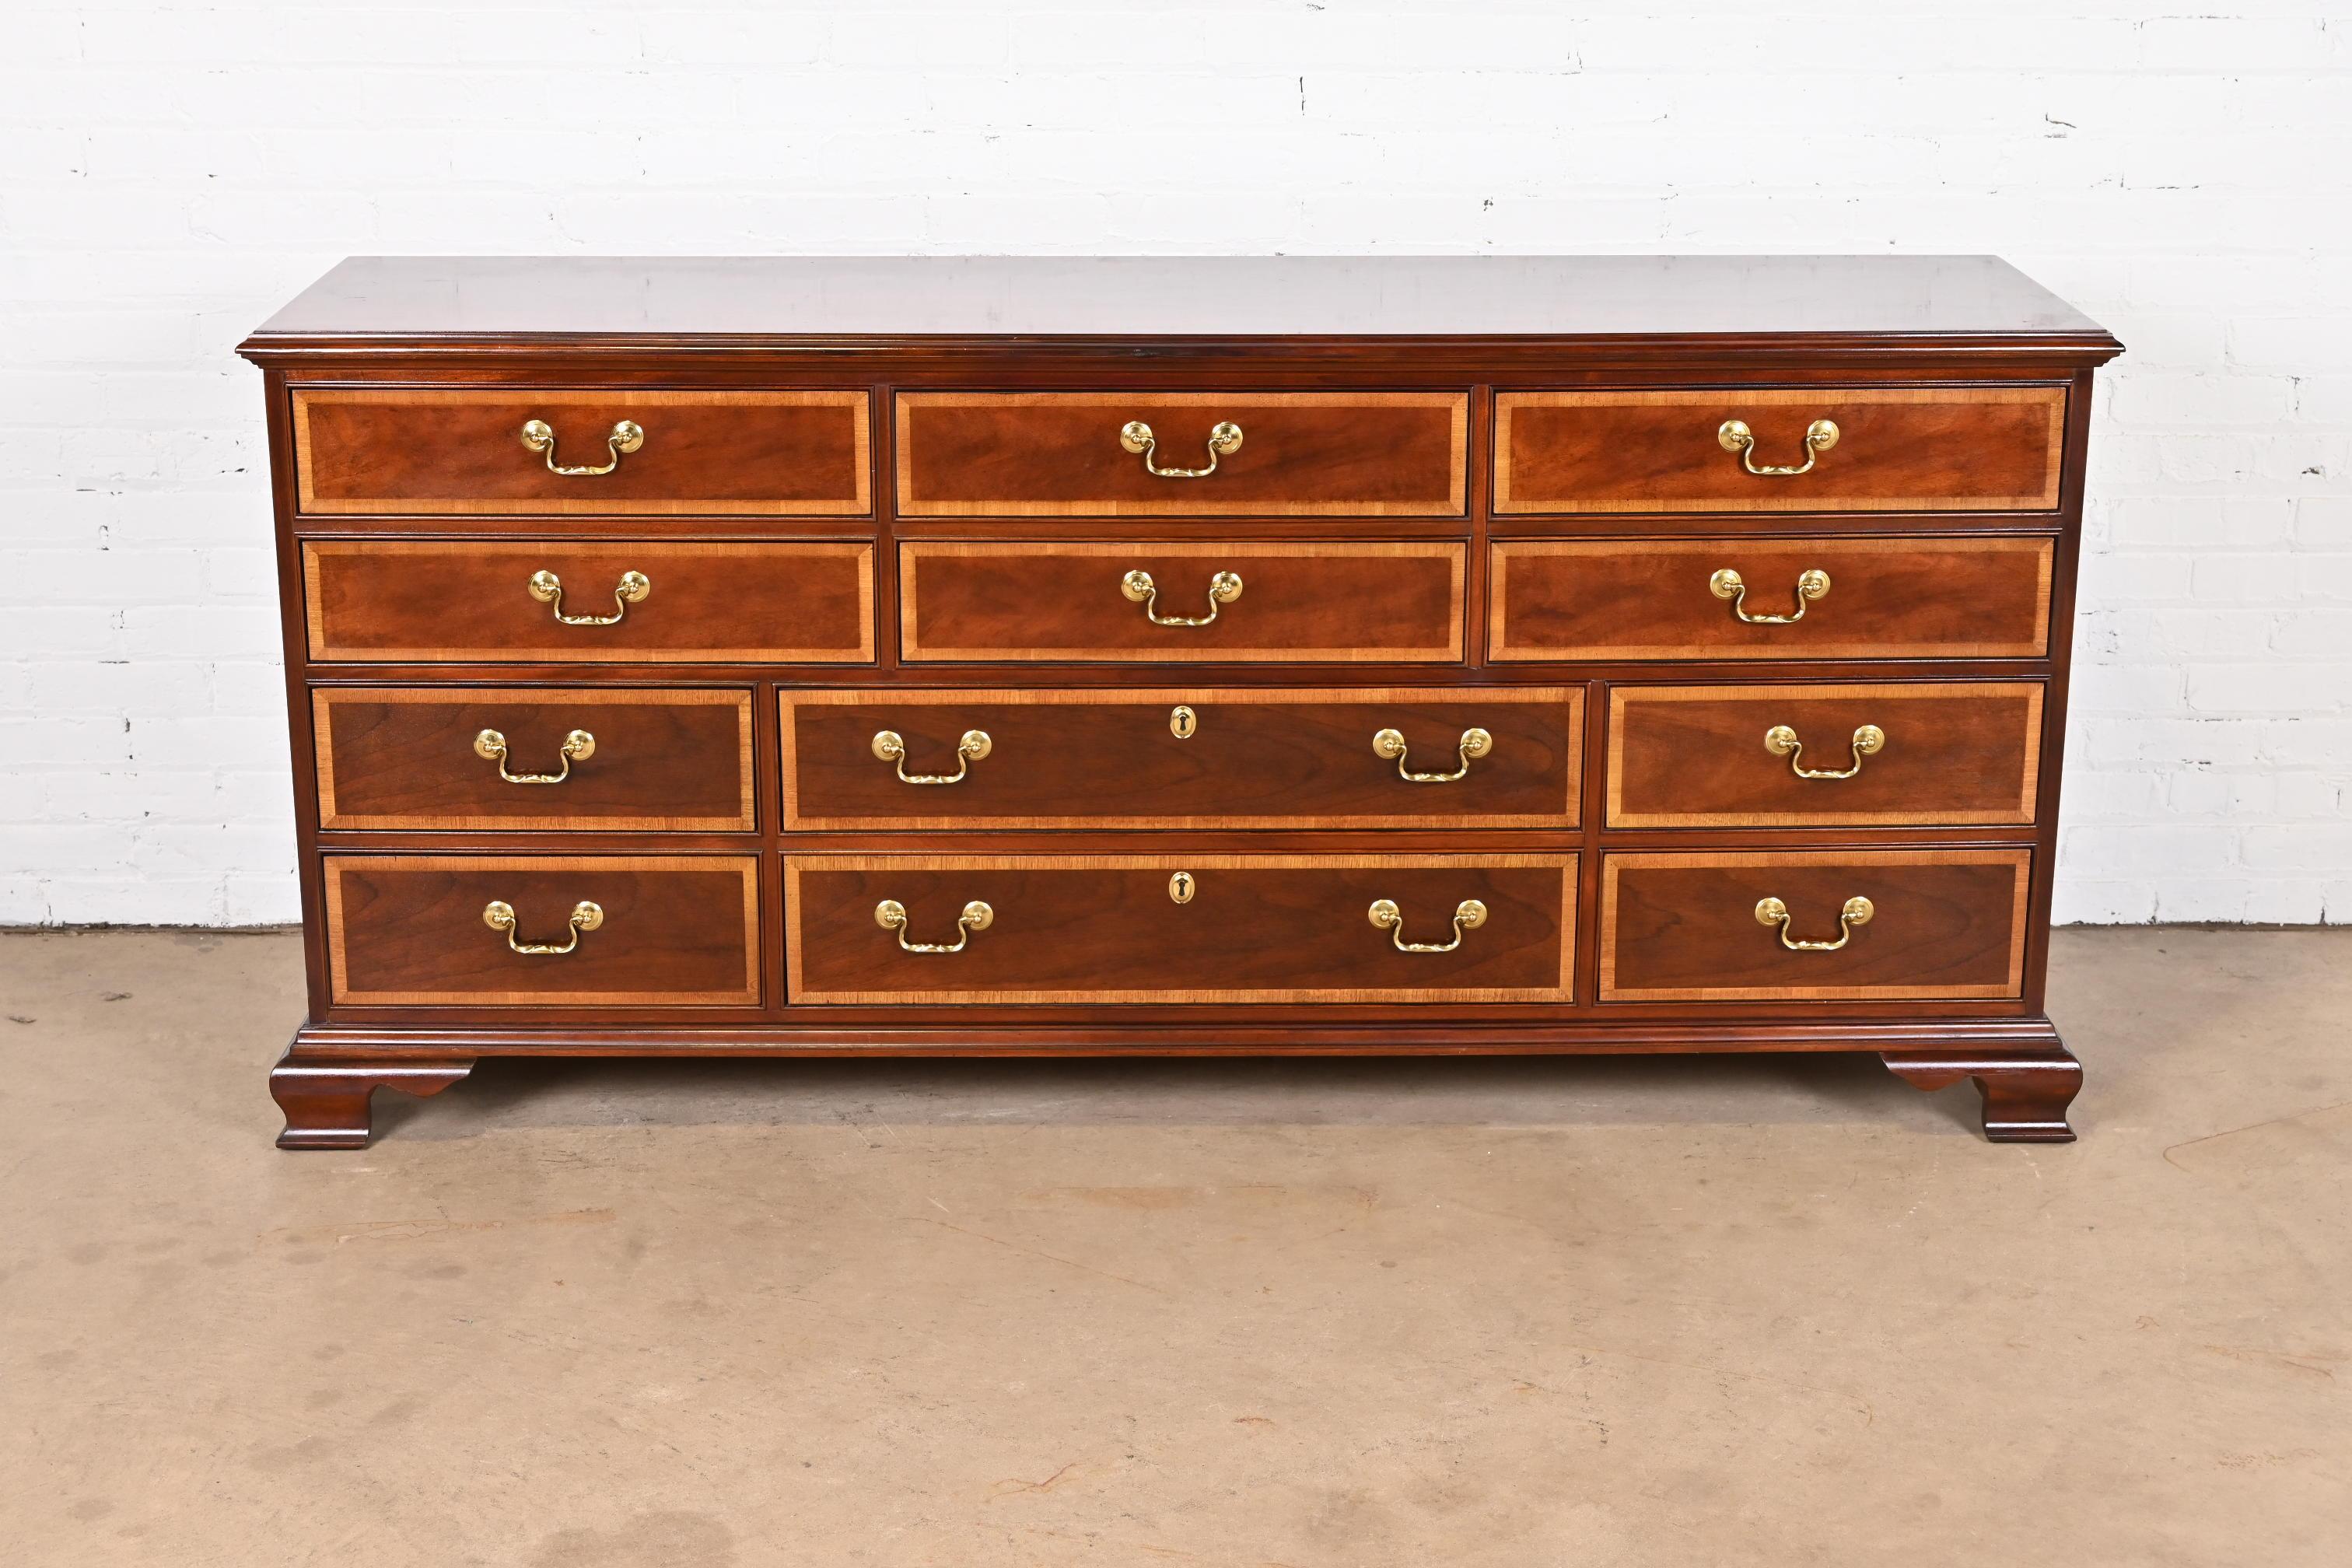 A gorgeous Georgian style twelve-drawer dresser or chest of drawers

By Thomasville, 